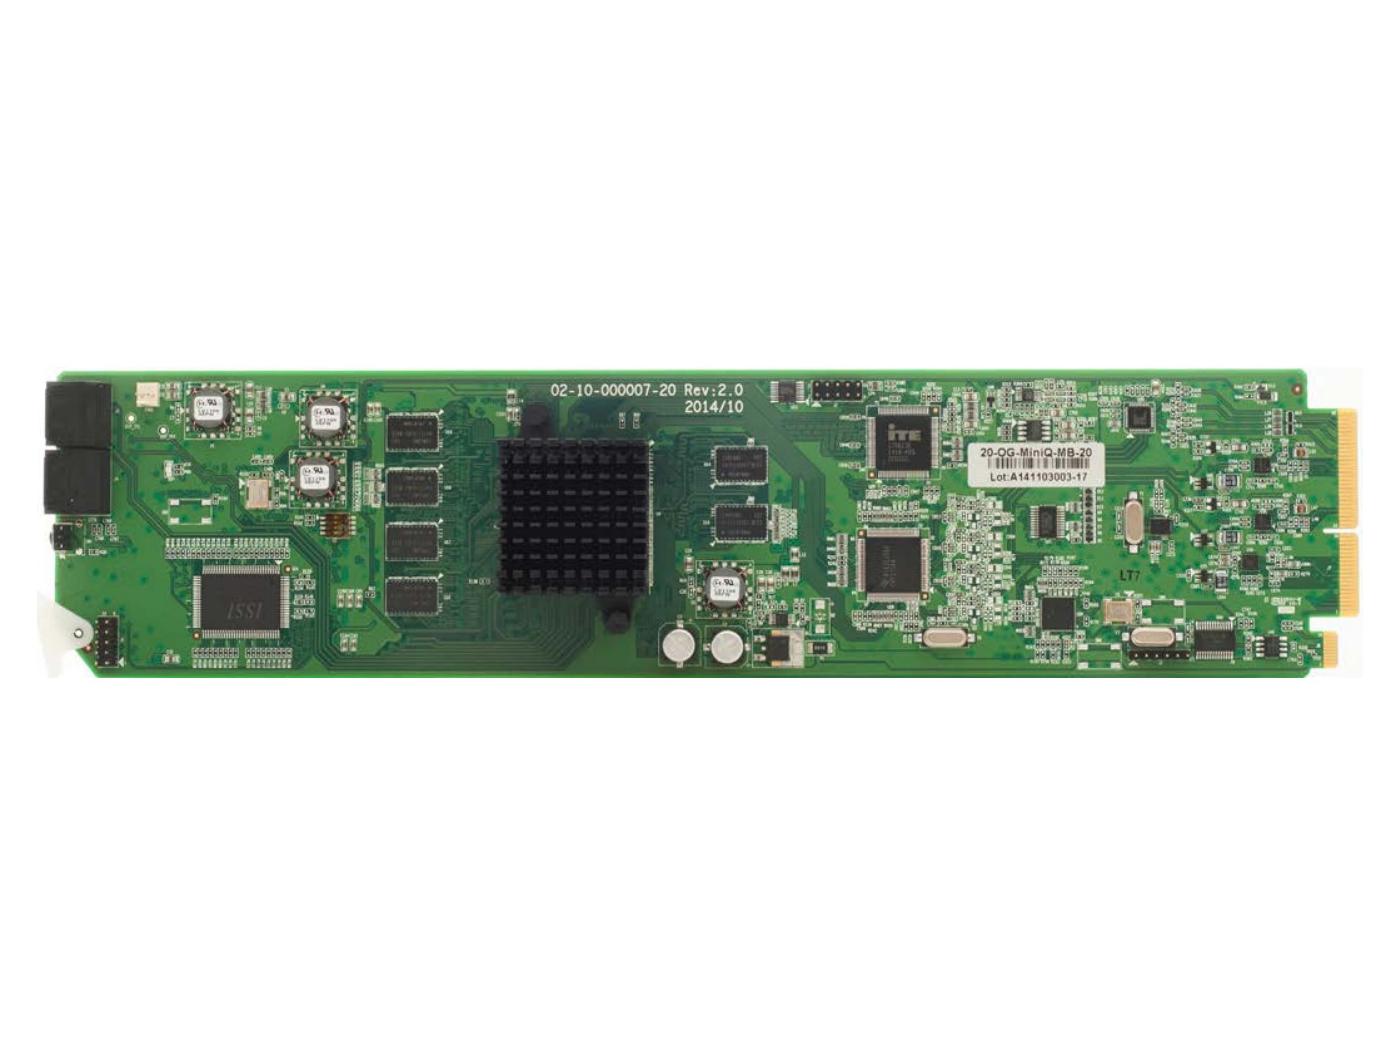 OG-US-4000-MB HDMI/SDI openGear Universal Scaler Card with Genlock by Apantac